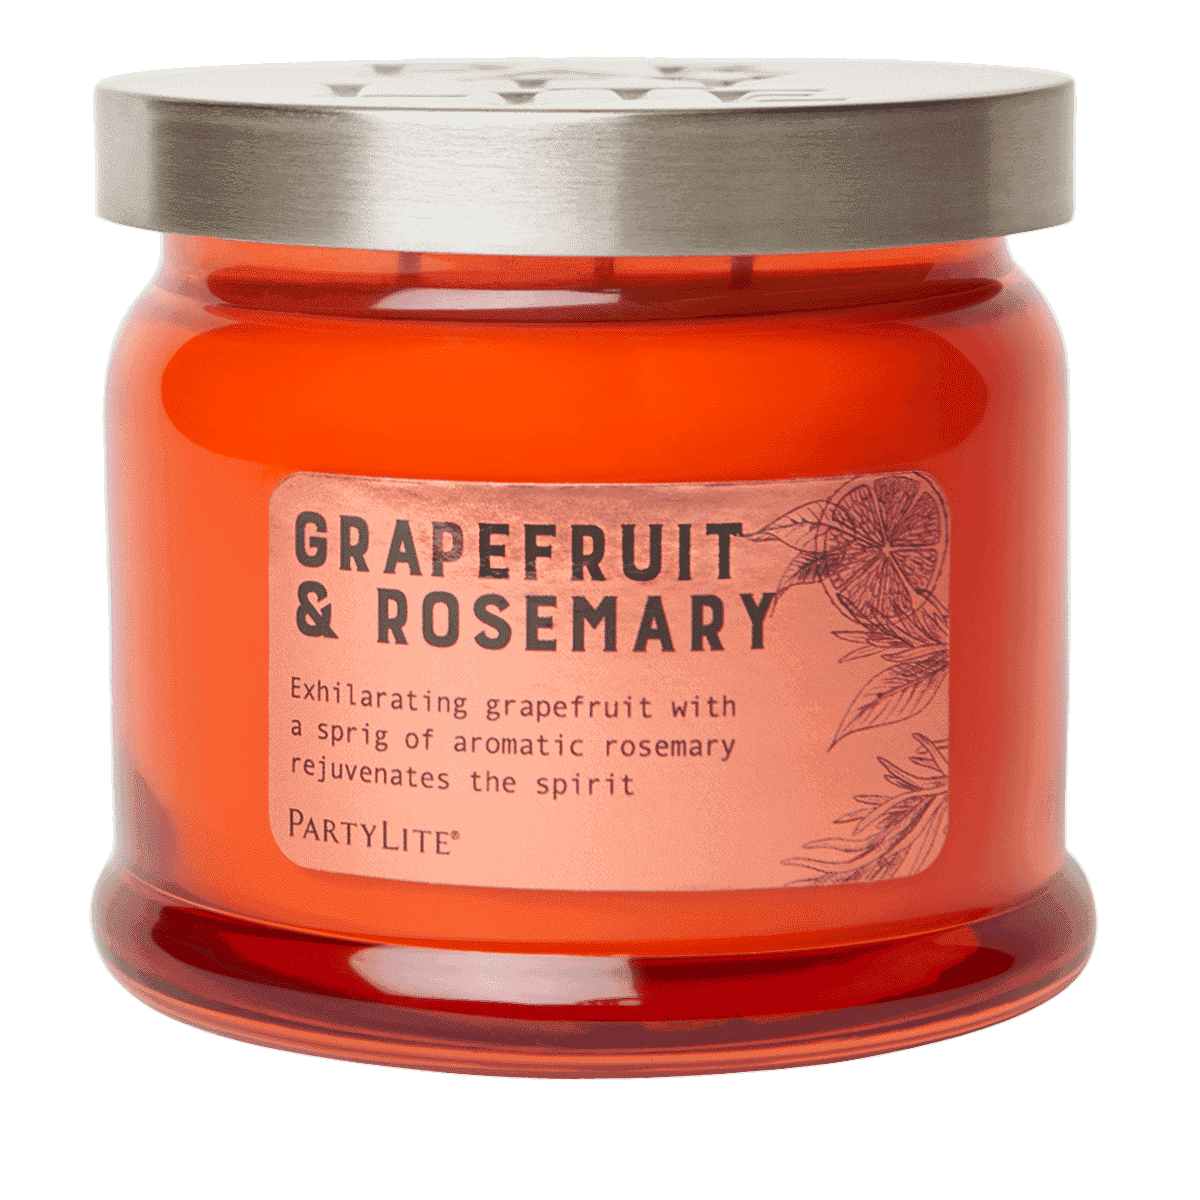 Grapefruit & Rosemary 3 Wick Jar Candle - PartyLite US